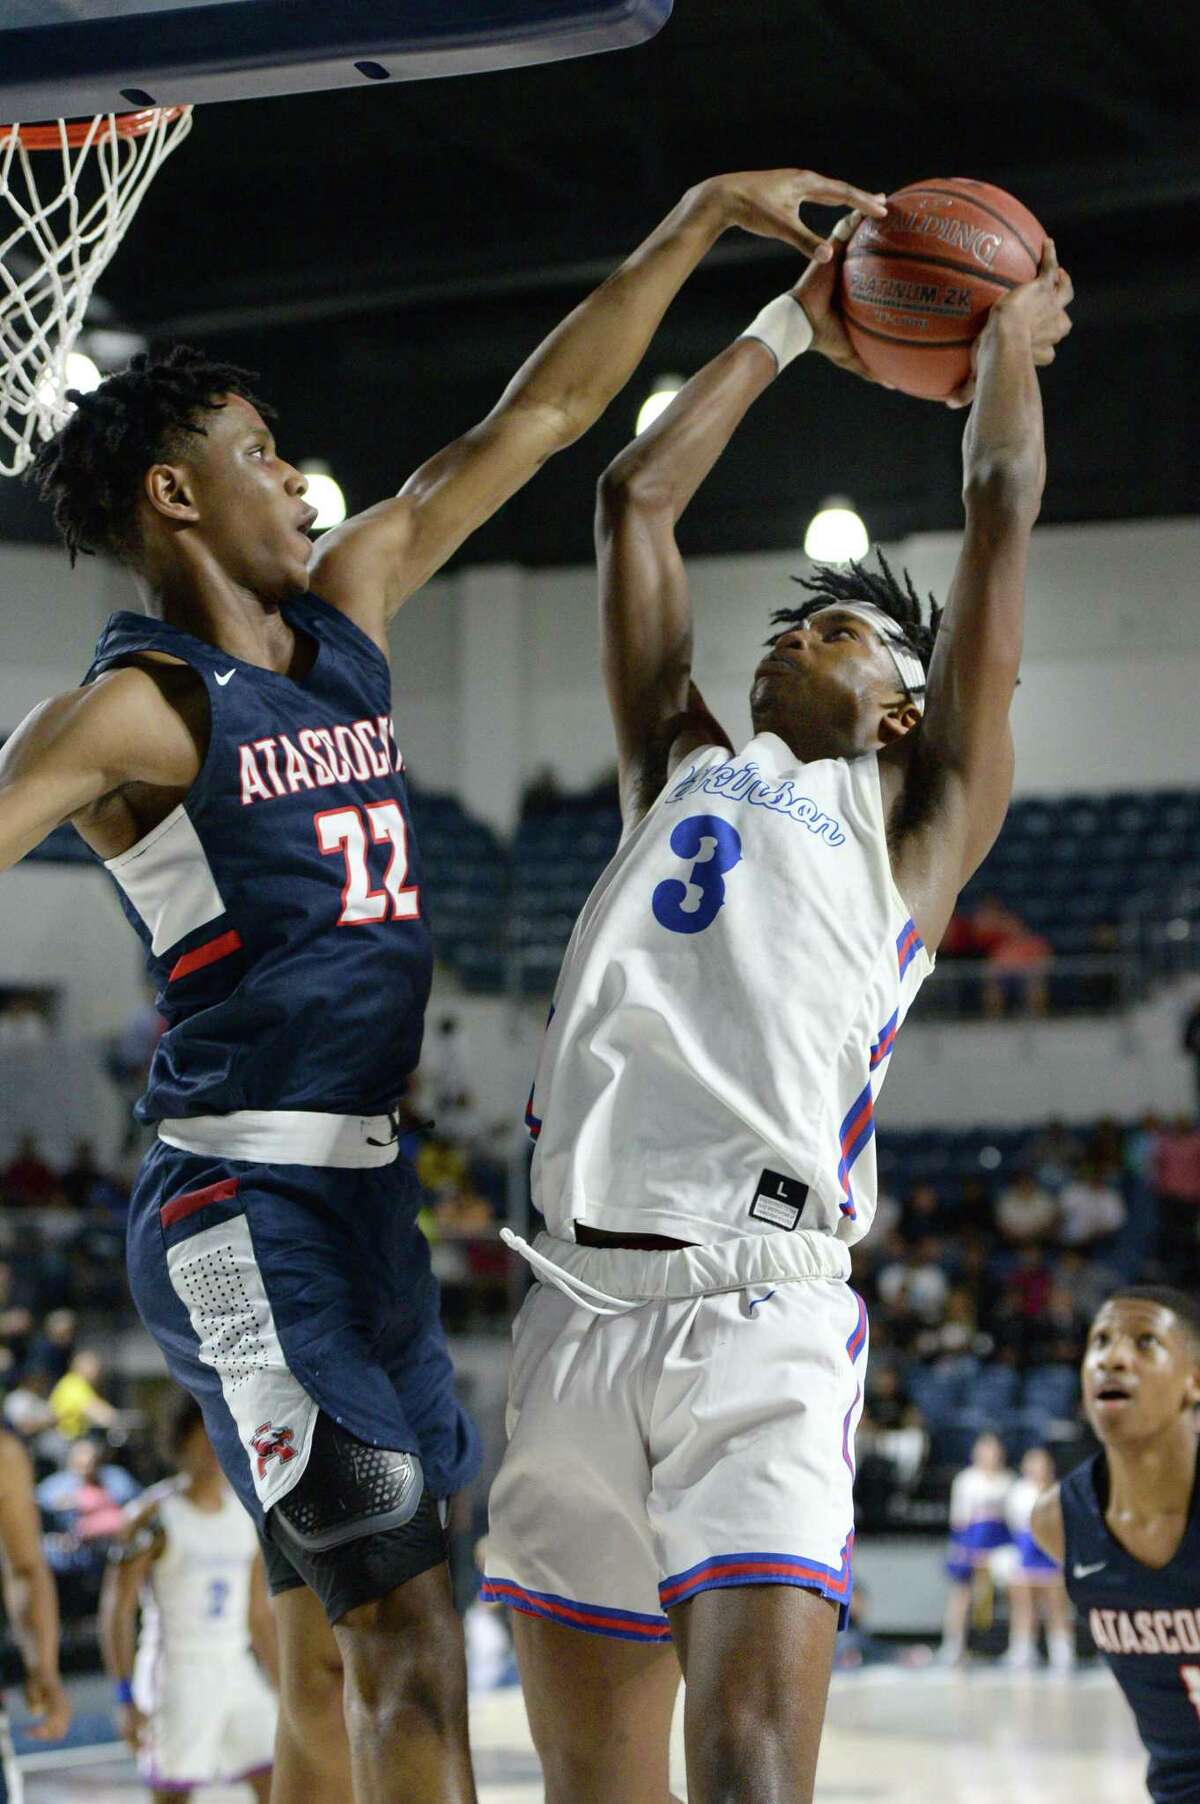 Cameron Morrison (22) of Atascocita attempts to block the shot of Tramon Mark (3) of Dickinson during the second quarter of the Boys 6A Region III Quarterfinal basketball game between the Dickinson Gators and the Atascocita Eagles on Tuesday, March 3, 2020 at Delmar Fieldhouse, Houston, TX.